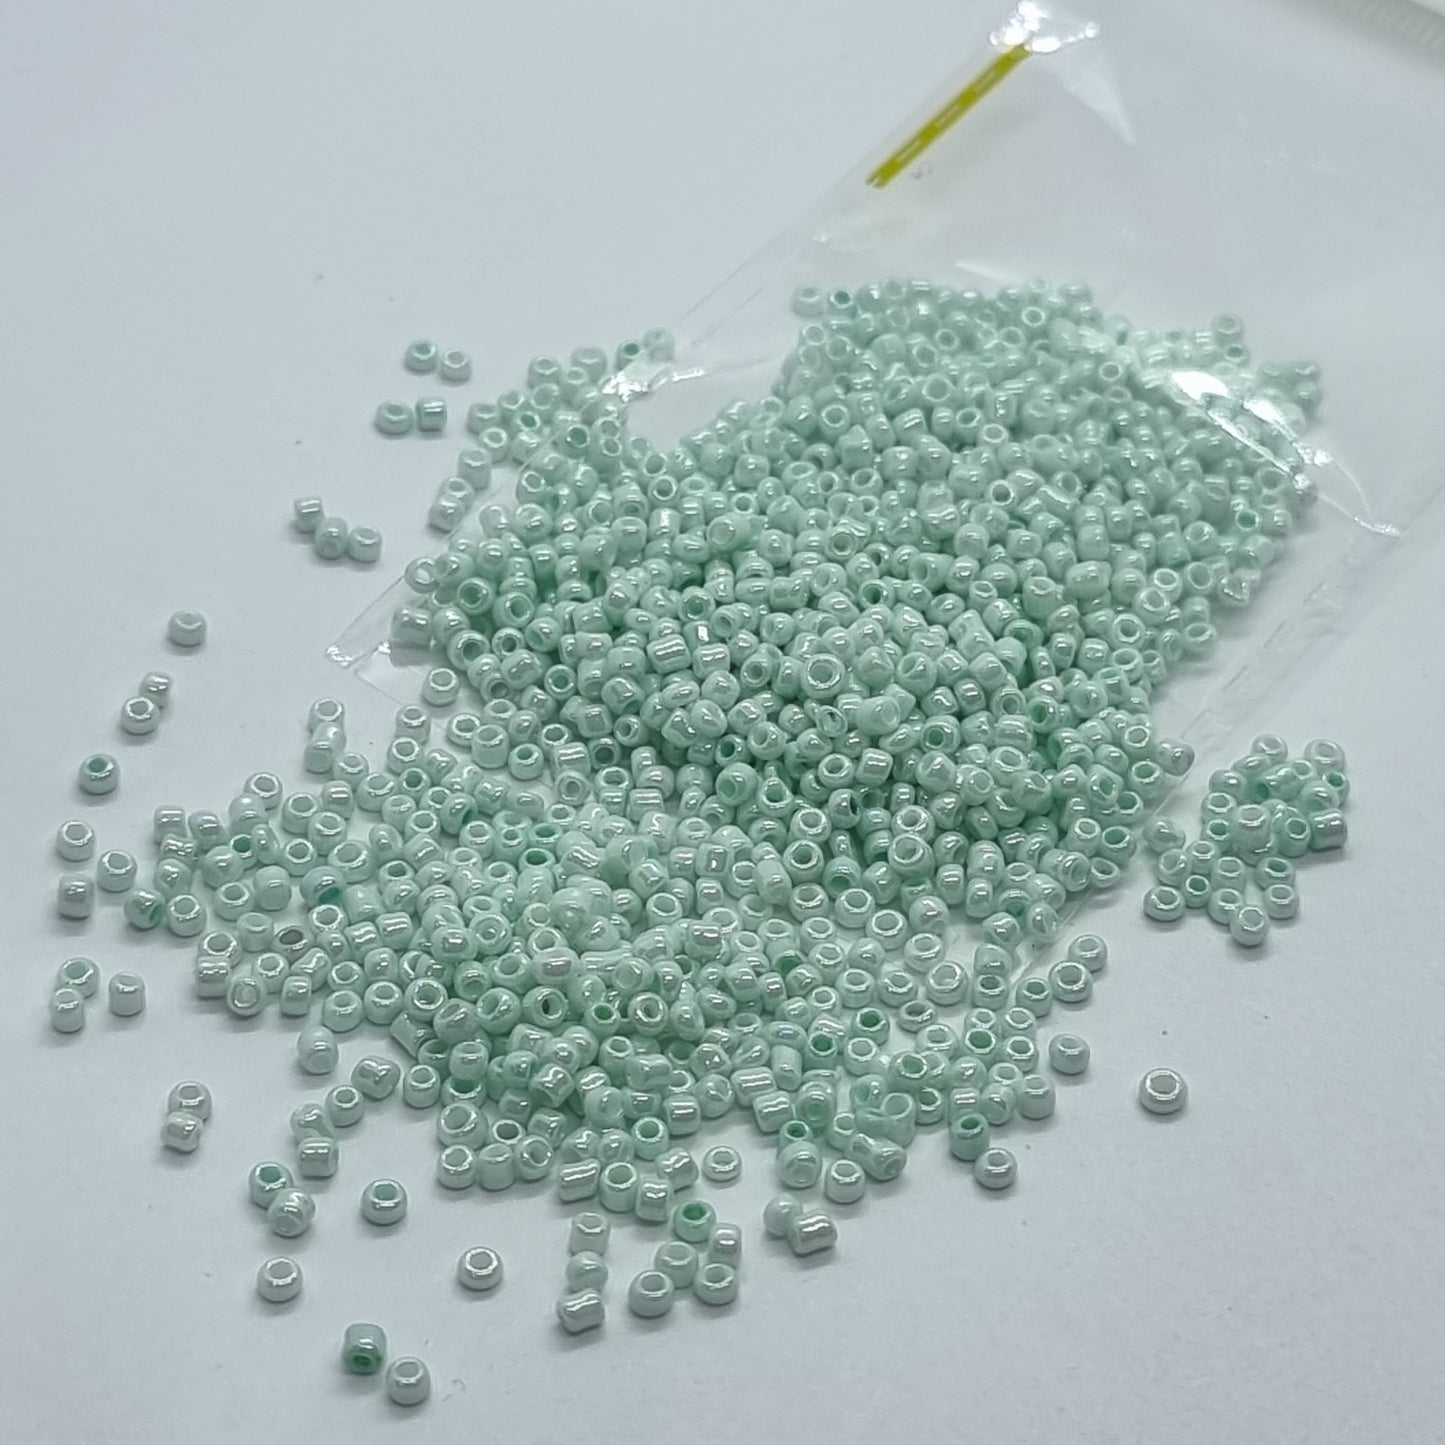 15g 15/0 Pale Turquoise Seed Beads